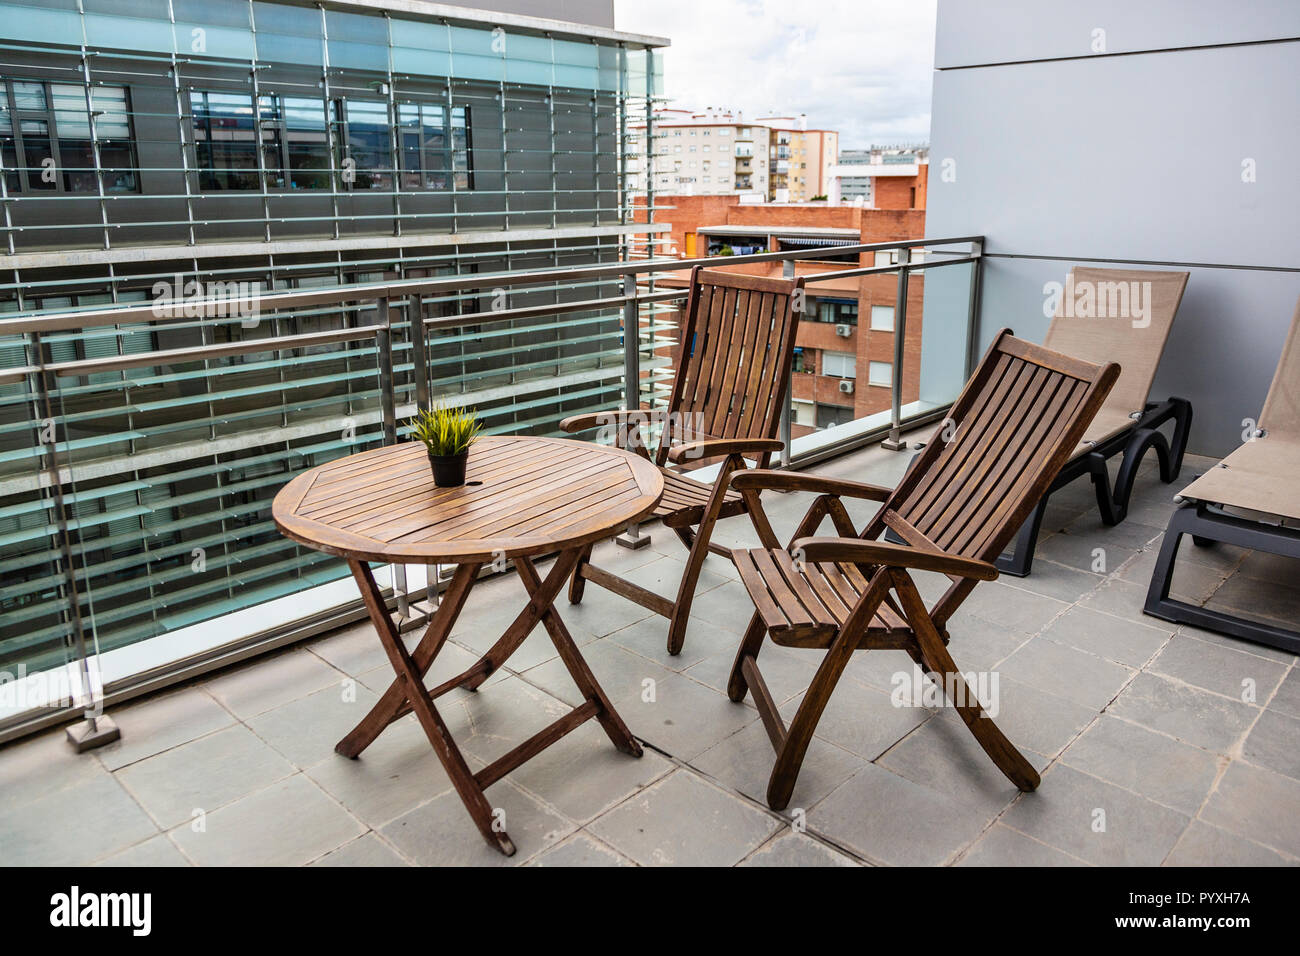 Wooden folding chairs and table on a hotel balcony in Malaga, Spain Stock Photo